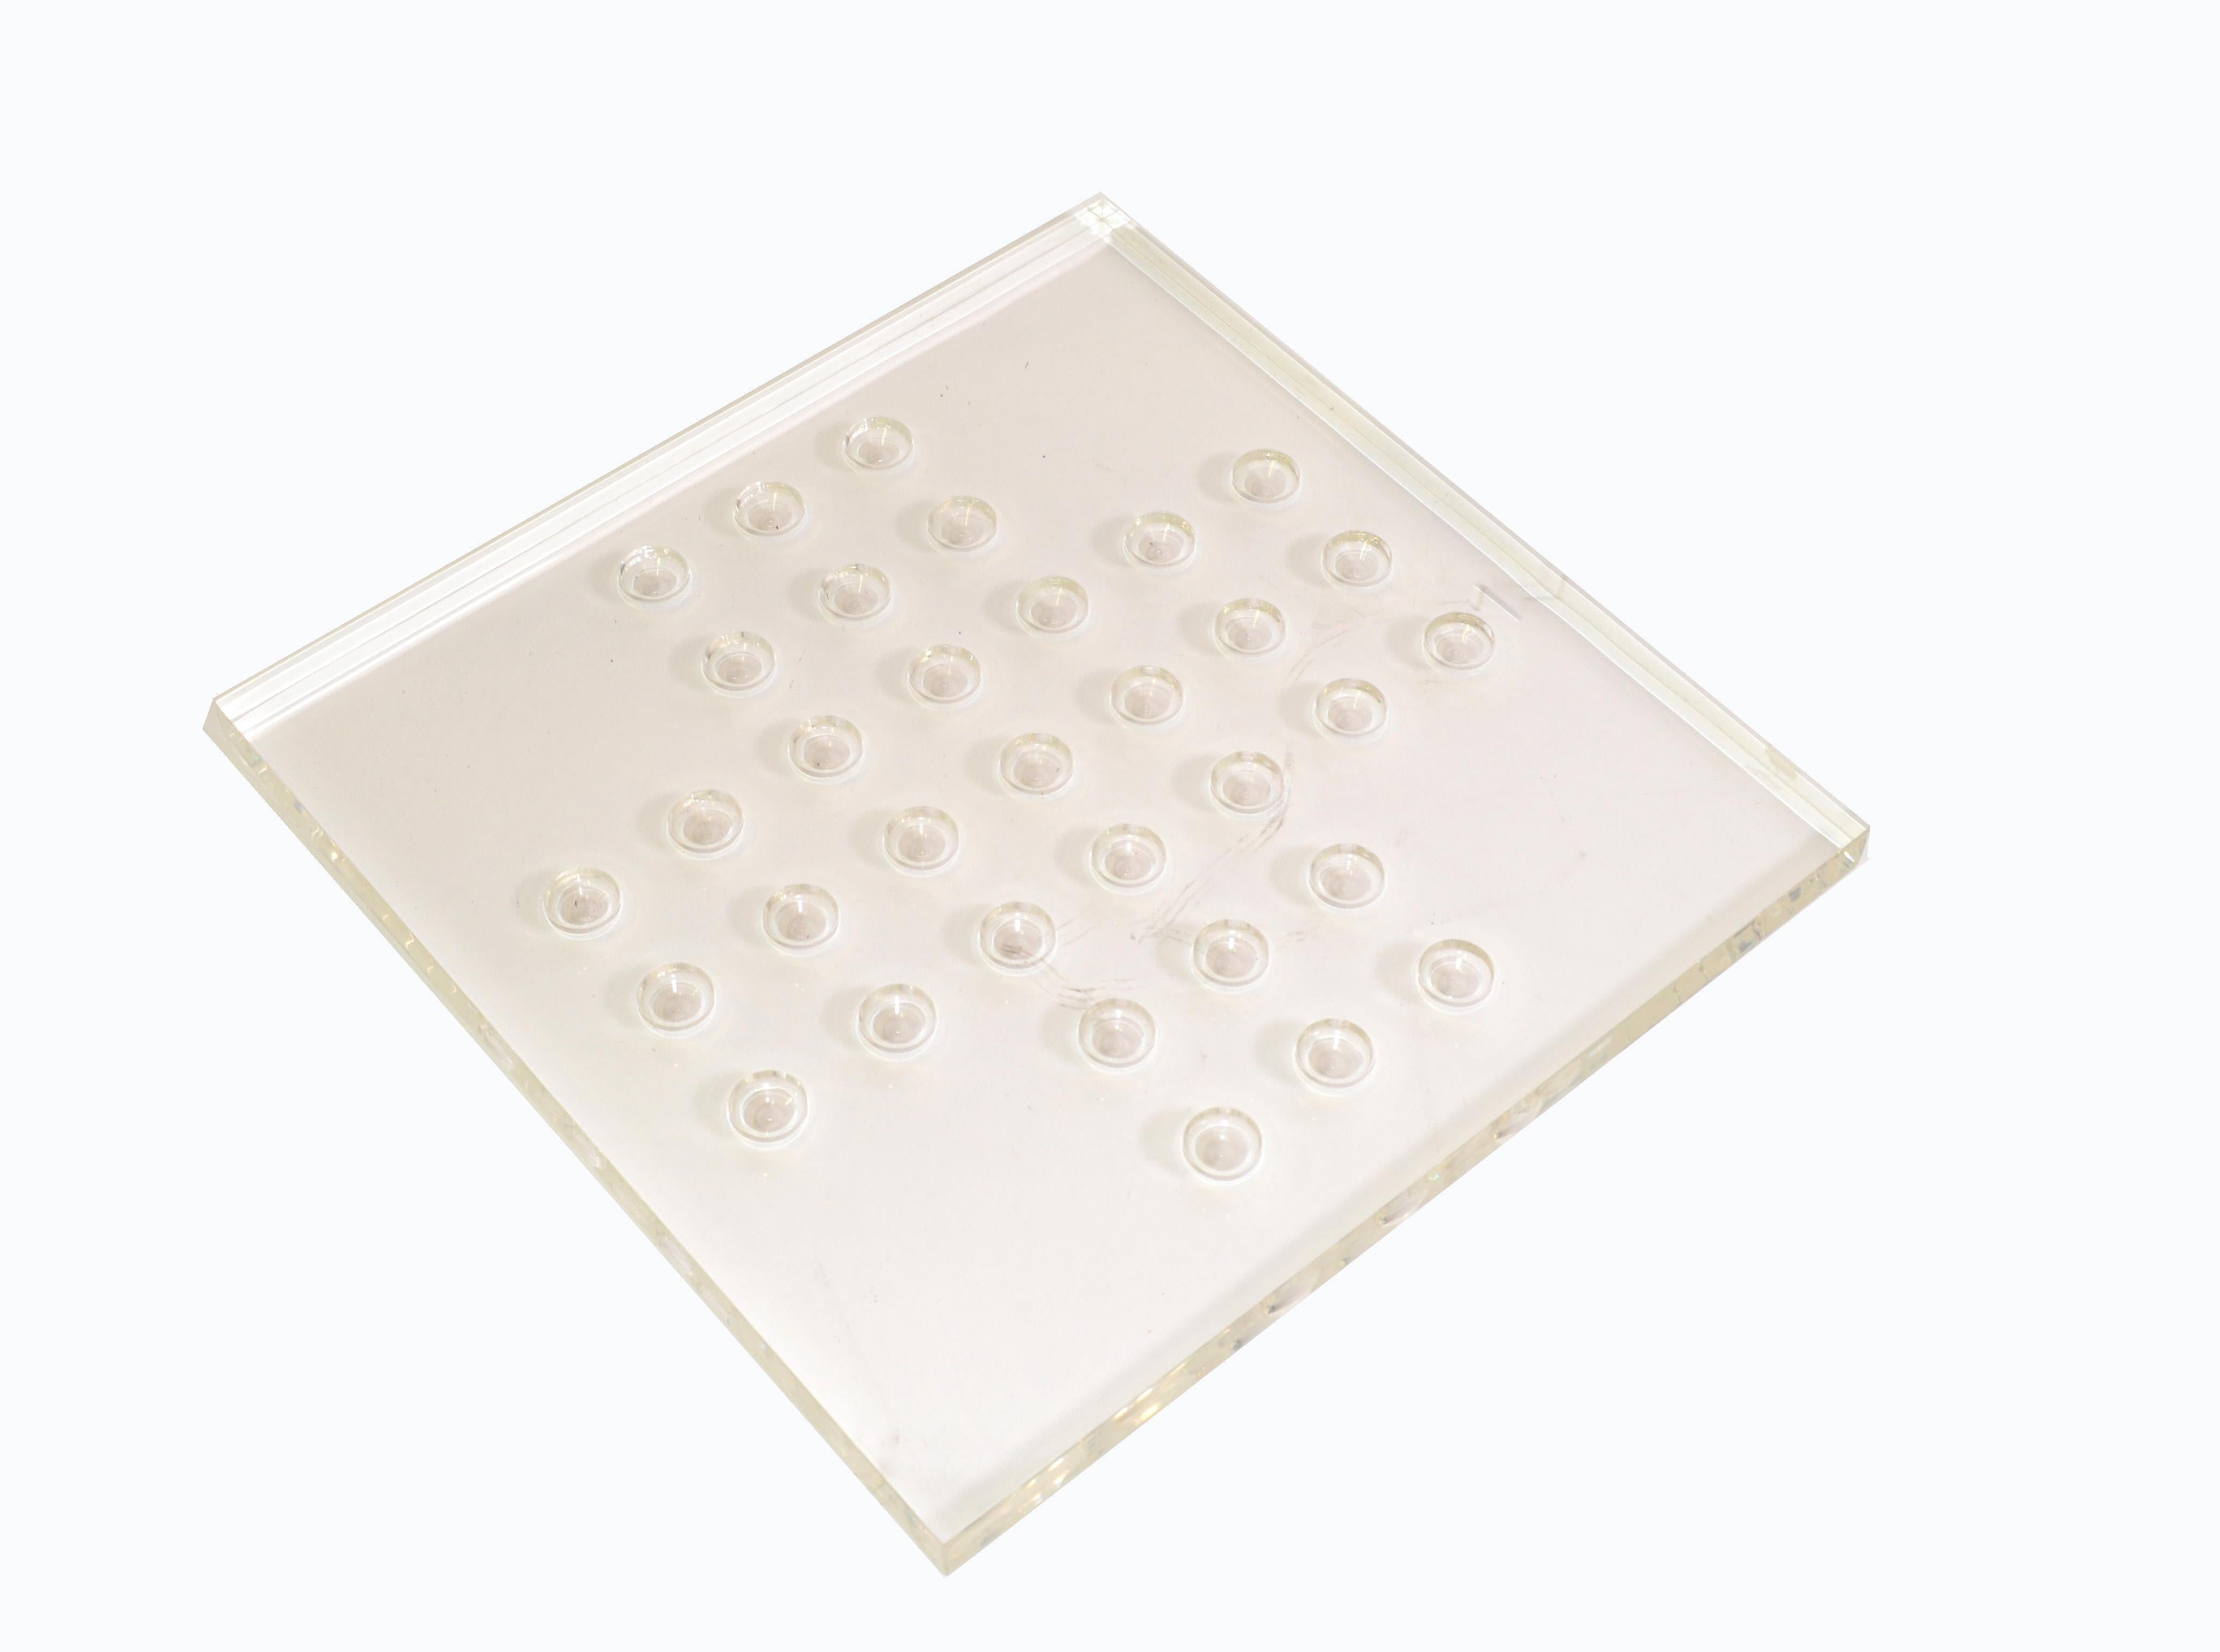 Mid-Century Modern square acrylic or Lucite dotted table centerpiece, game board.
 